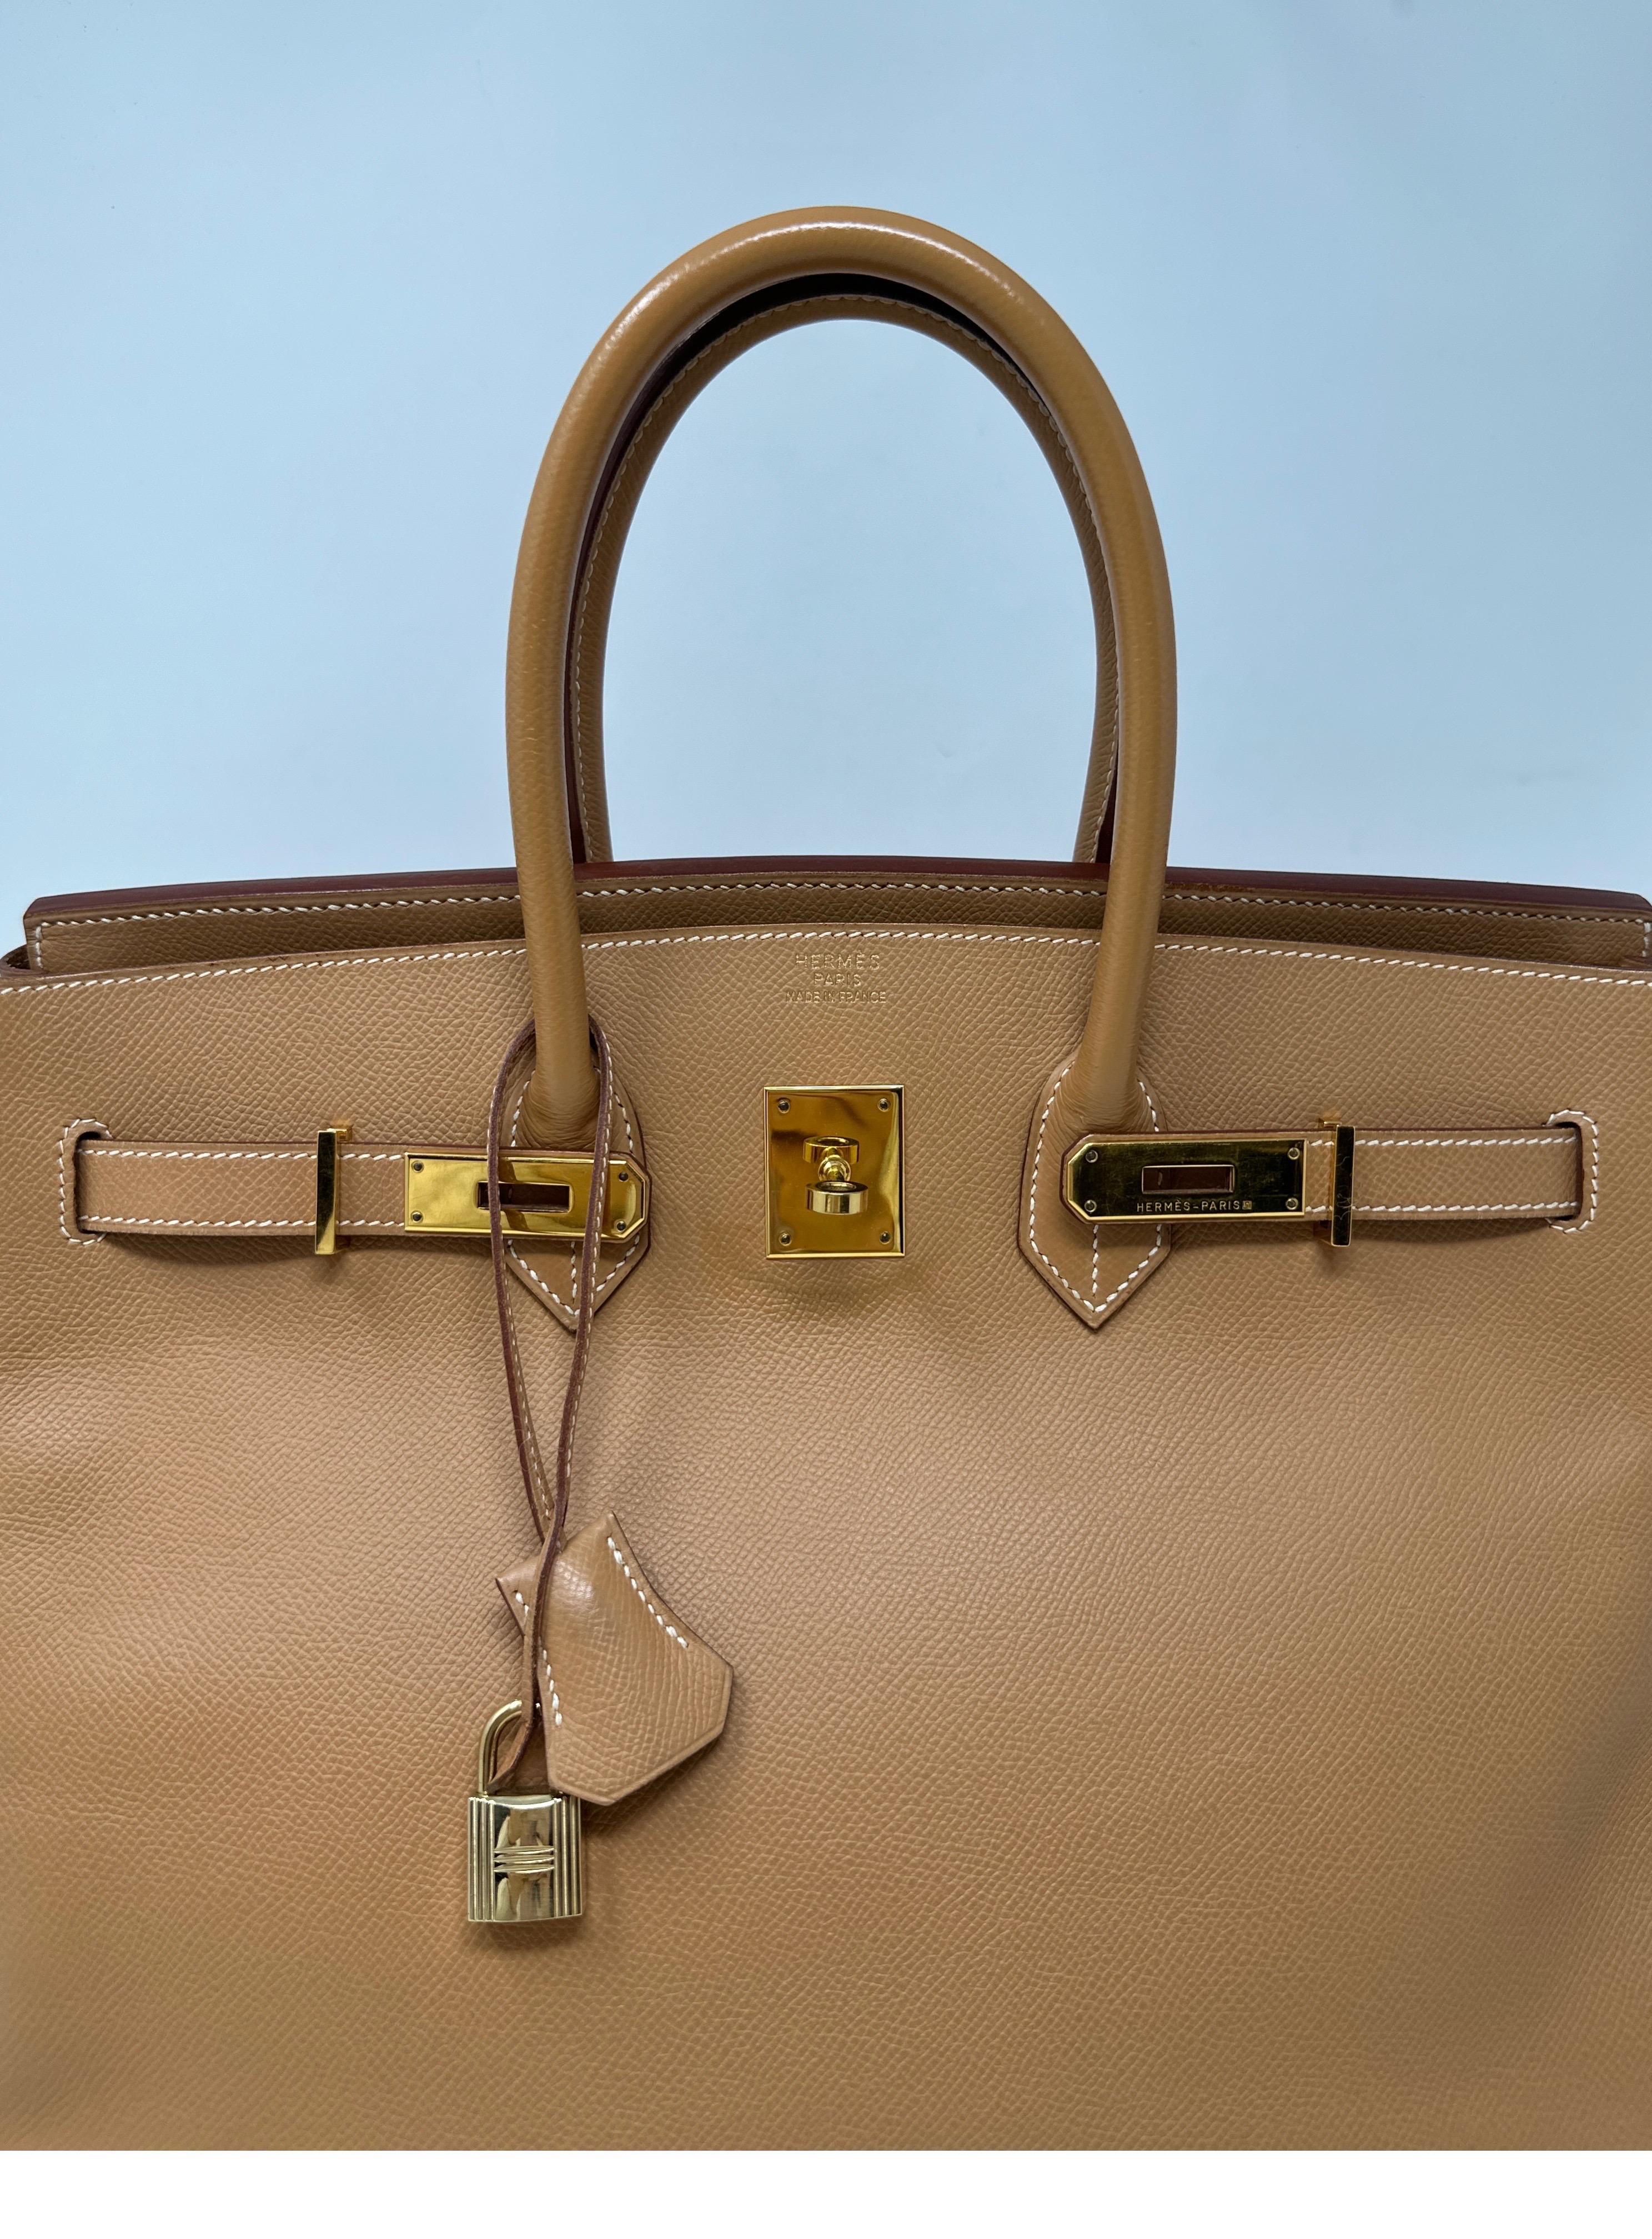 Hermes Natural Tan Birkin 35 Bag  In Excellent Condition For Sale In Athens, GA